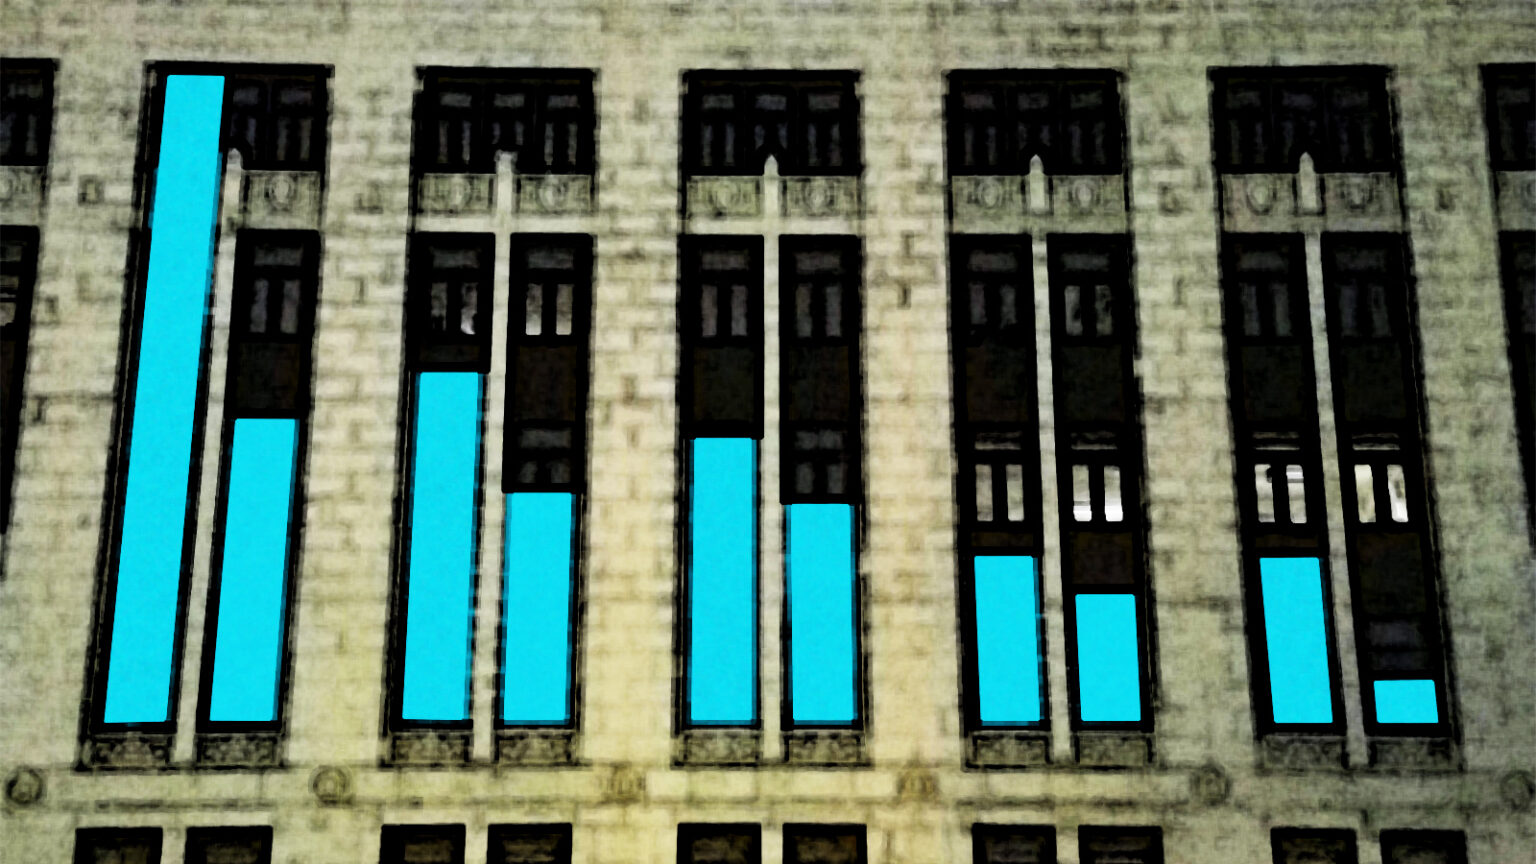 An illustration of a bar chart with a declining slope superimposed over the facade of the Wisconsin Department of Health Services building in Madison